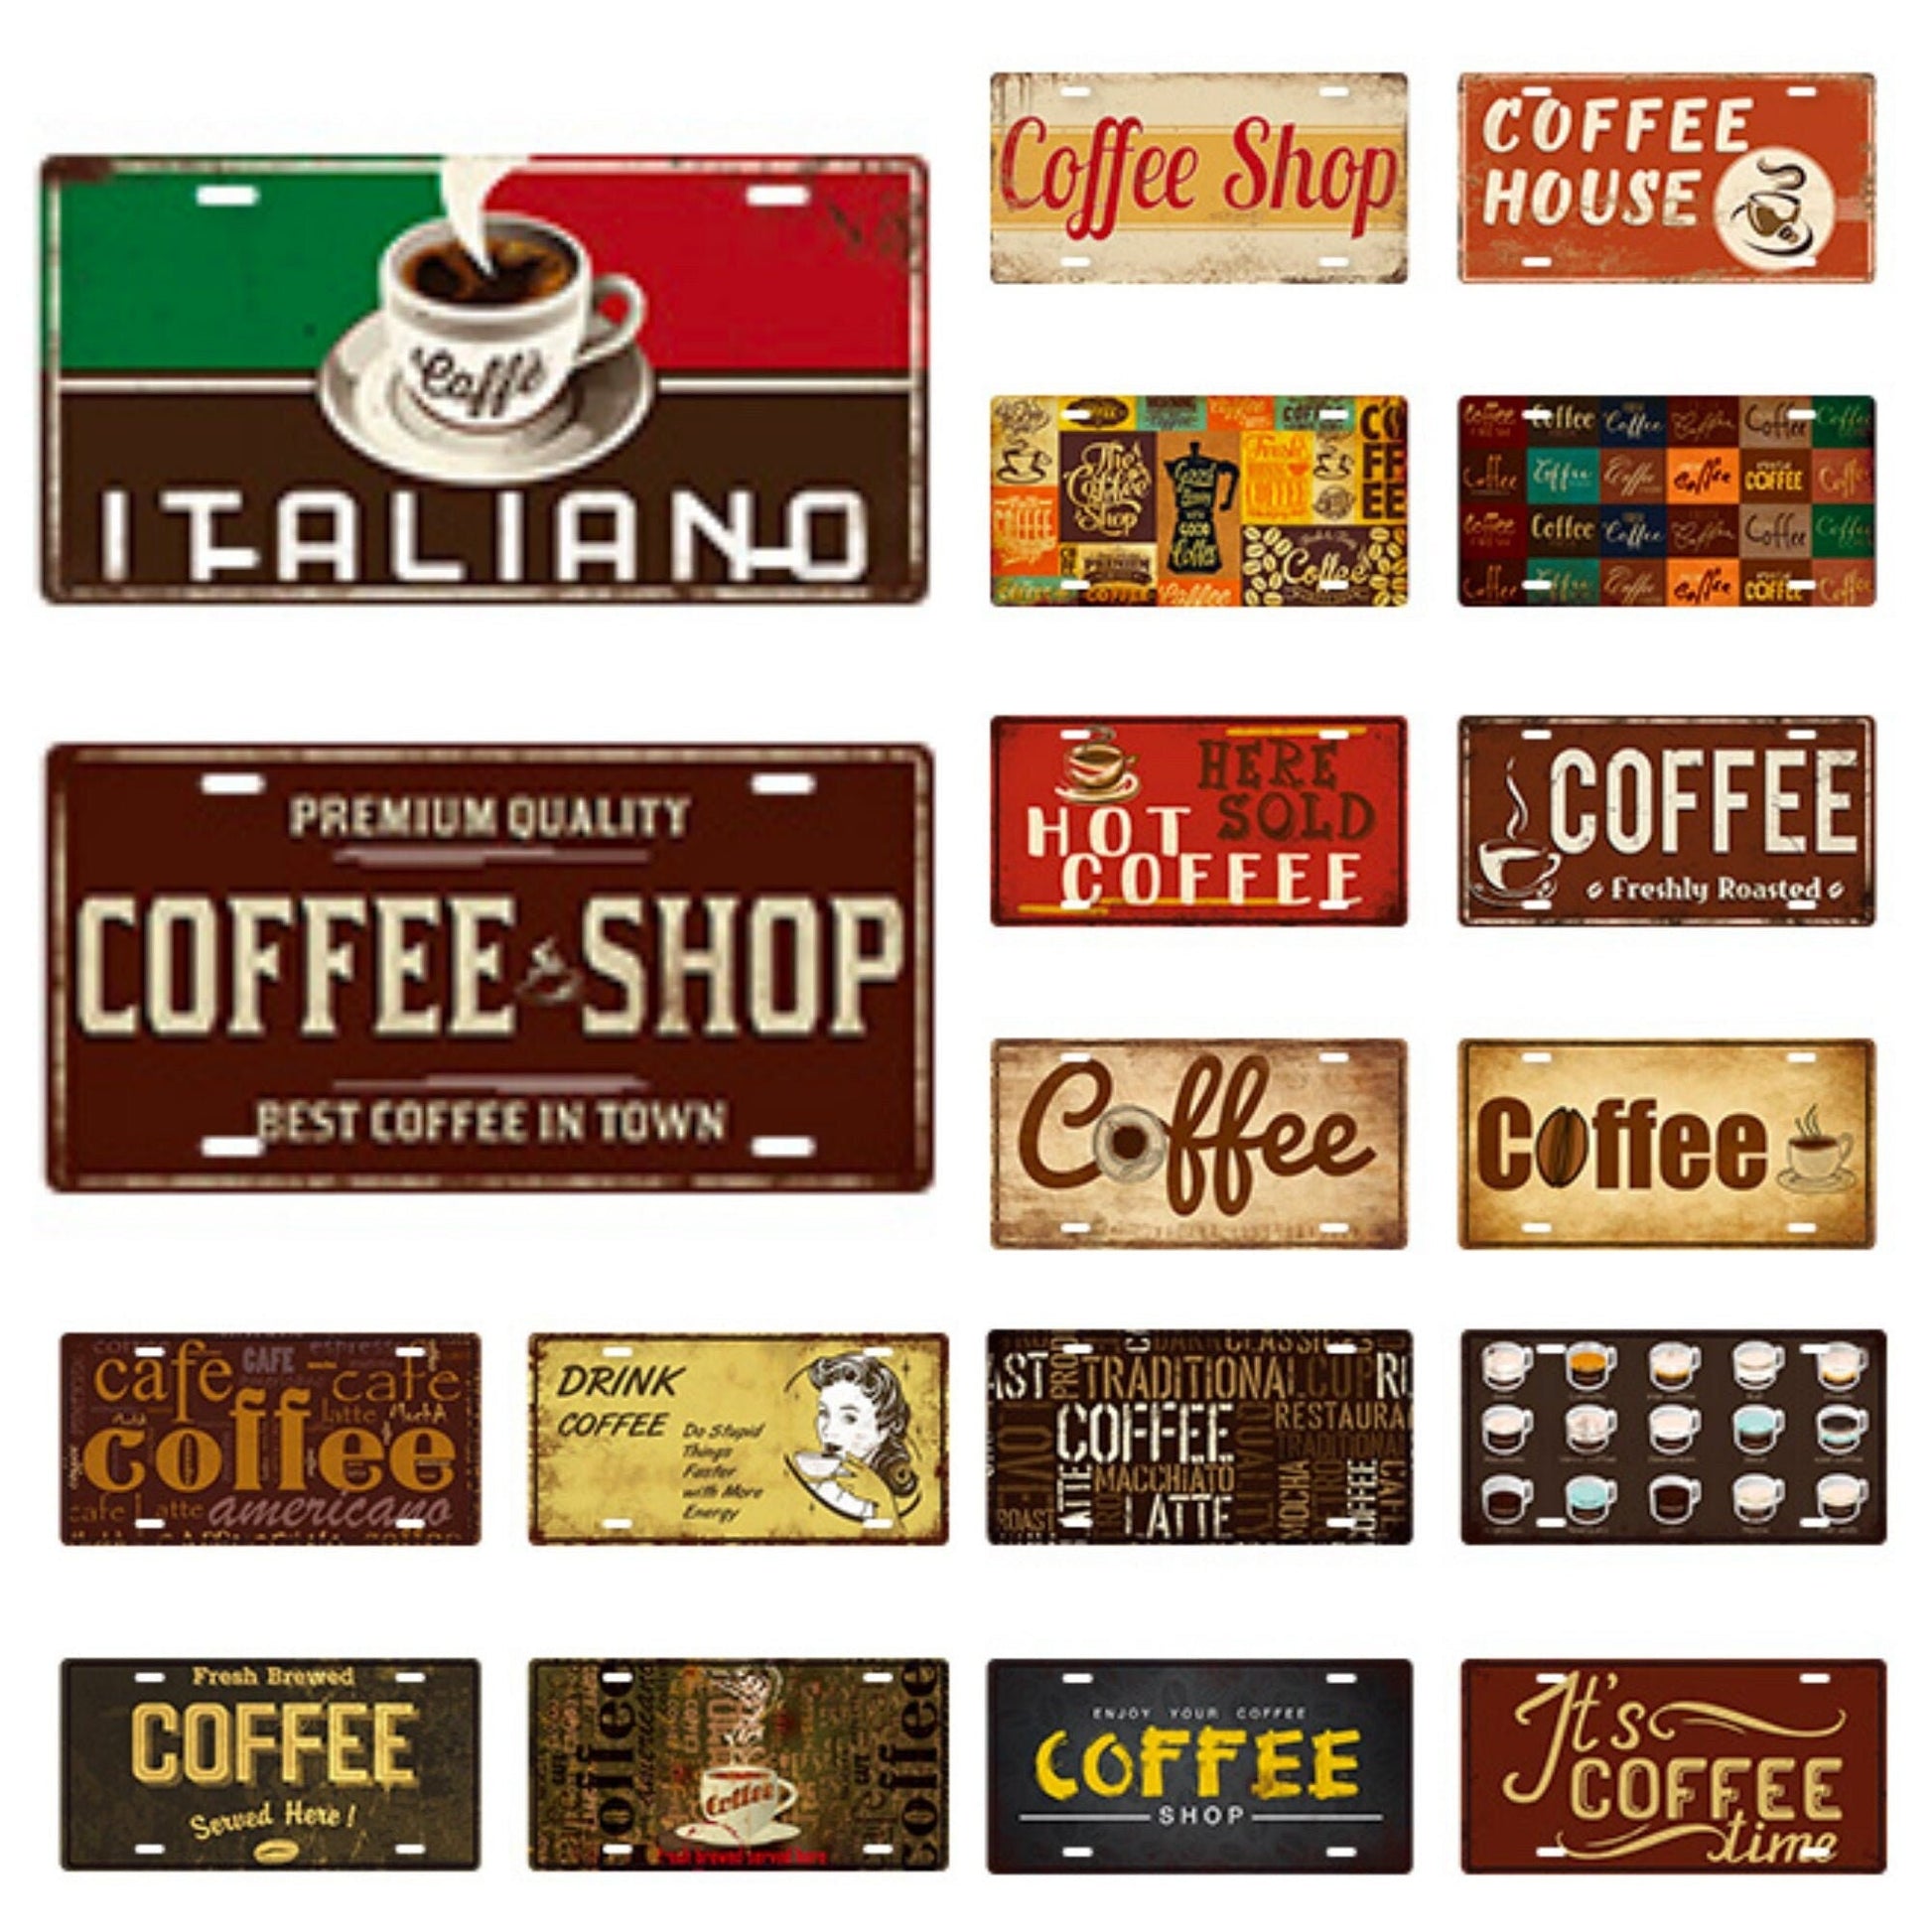 Coffee License Plate Tin Sign For Kitchen Decor | Café Decorative Metal Print | Shabby Chic Wall Hanging Plaques For Cafe Shop Cafeteria | Papagaio Studio Etsy Shop